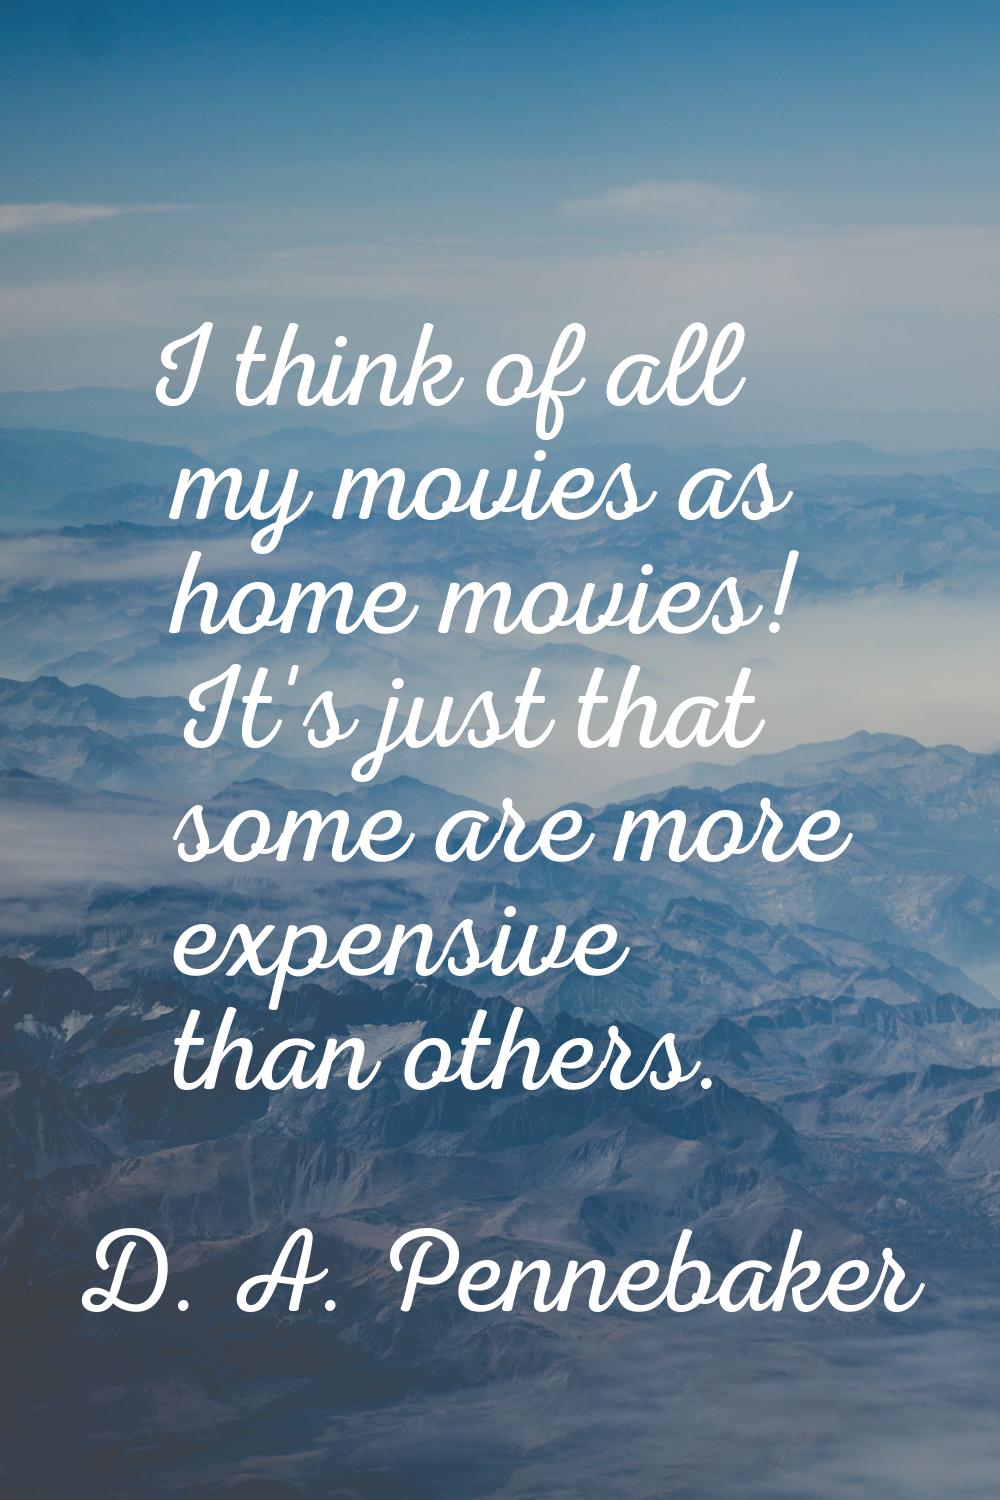 I think of all my movies as home movies! It's just that some are more expensive than others.